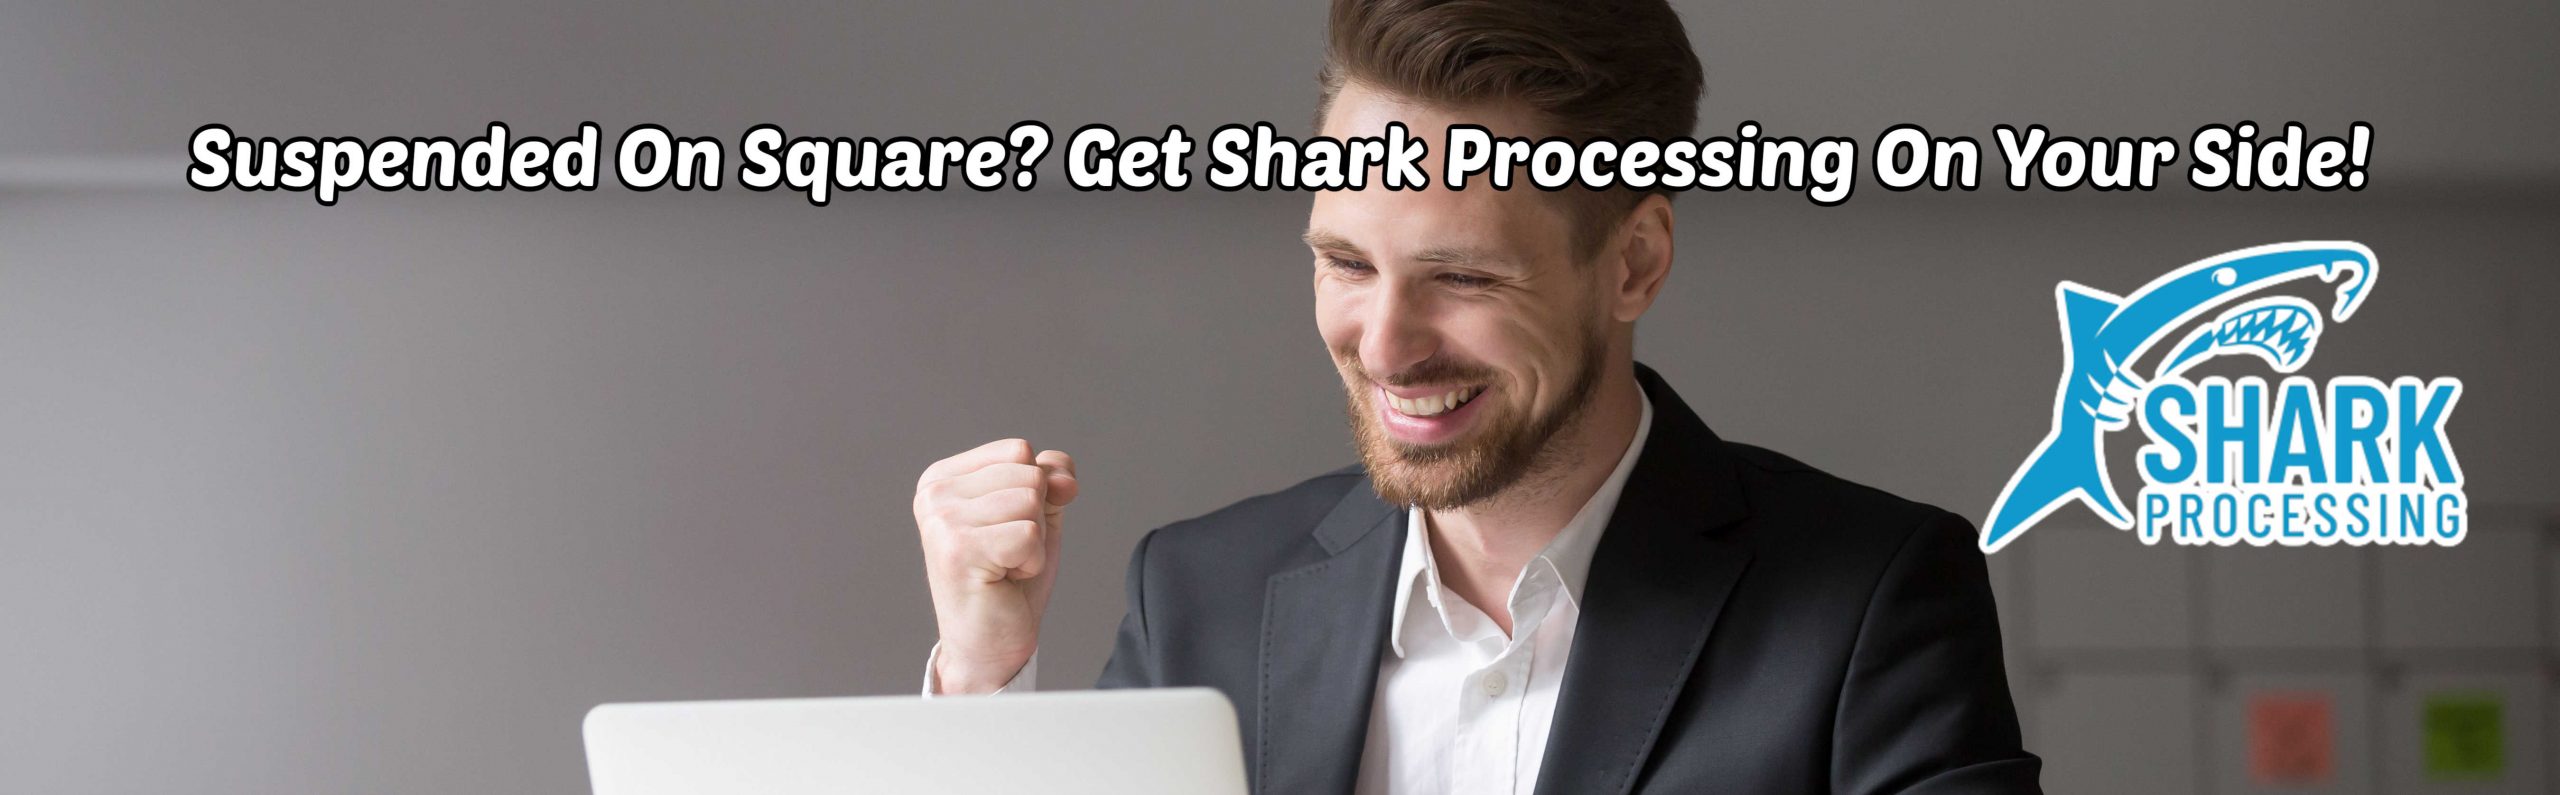 image of if square suspended your account get shark processing on your side